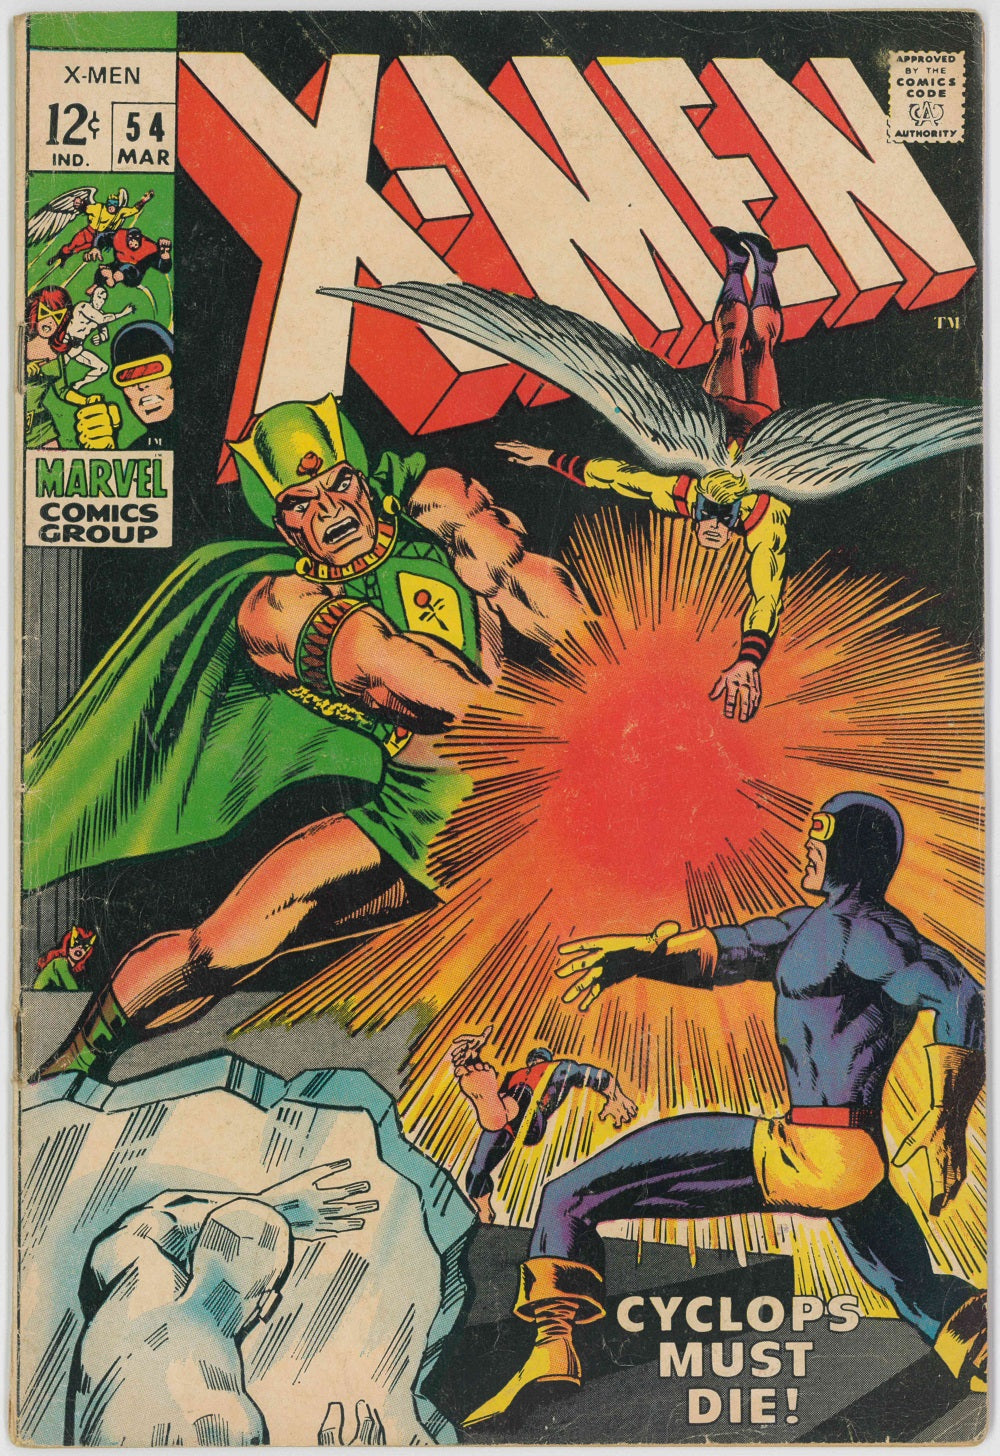 UNCANNY X-MEN (1963) #54 (FN) - FIRST APPEARANCE ALEX SUMMERS (HAVOK) AND LIVING PHARAOH